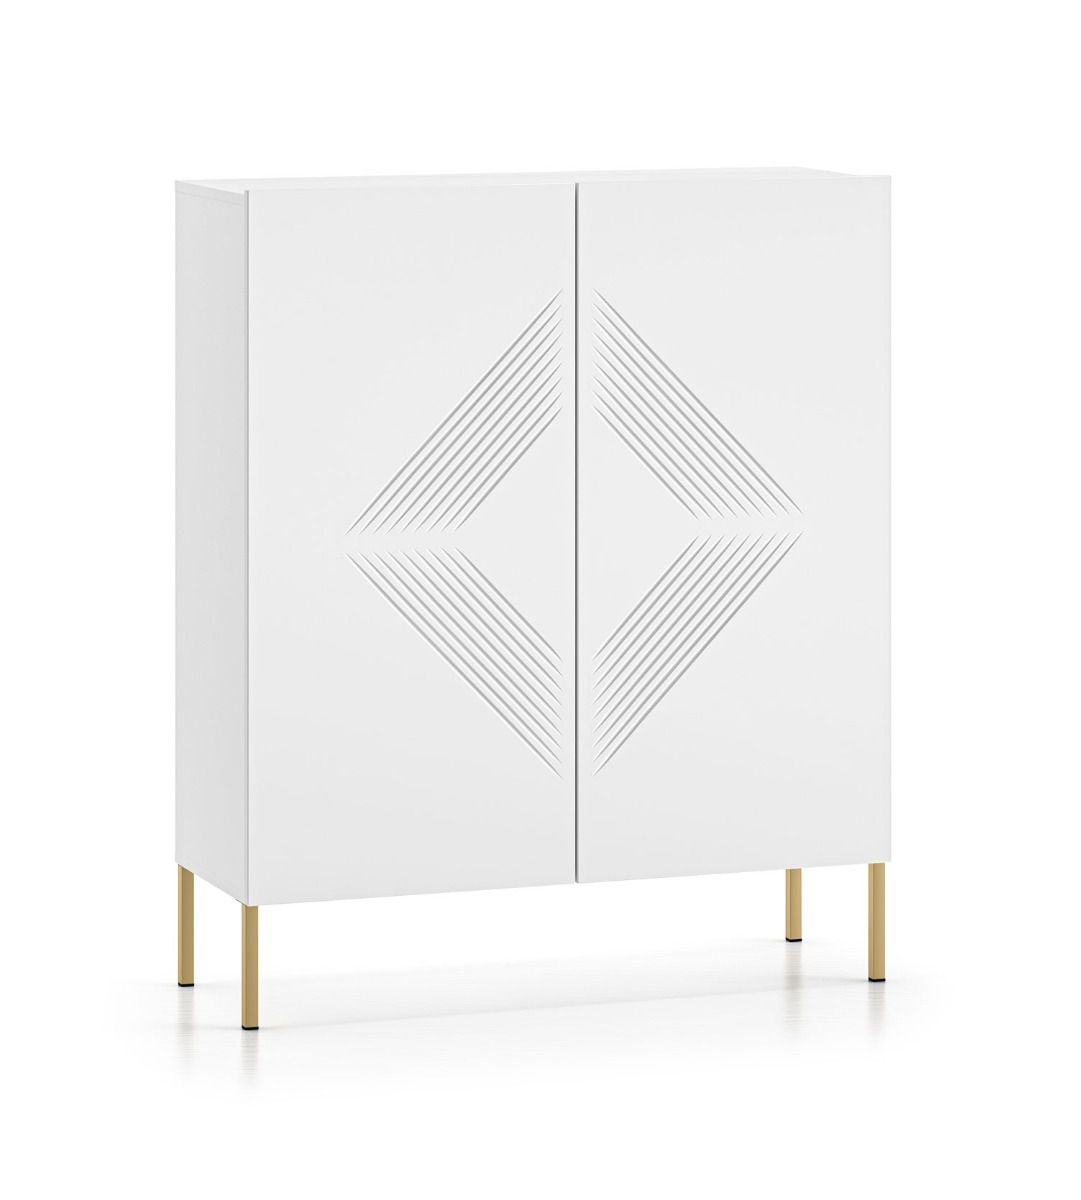 Modern chest of drawers with golden legs Taos 02, color: white matt, simple design, dimensions: 120 x 100 x 37 cm, with three compartments, for living room